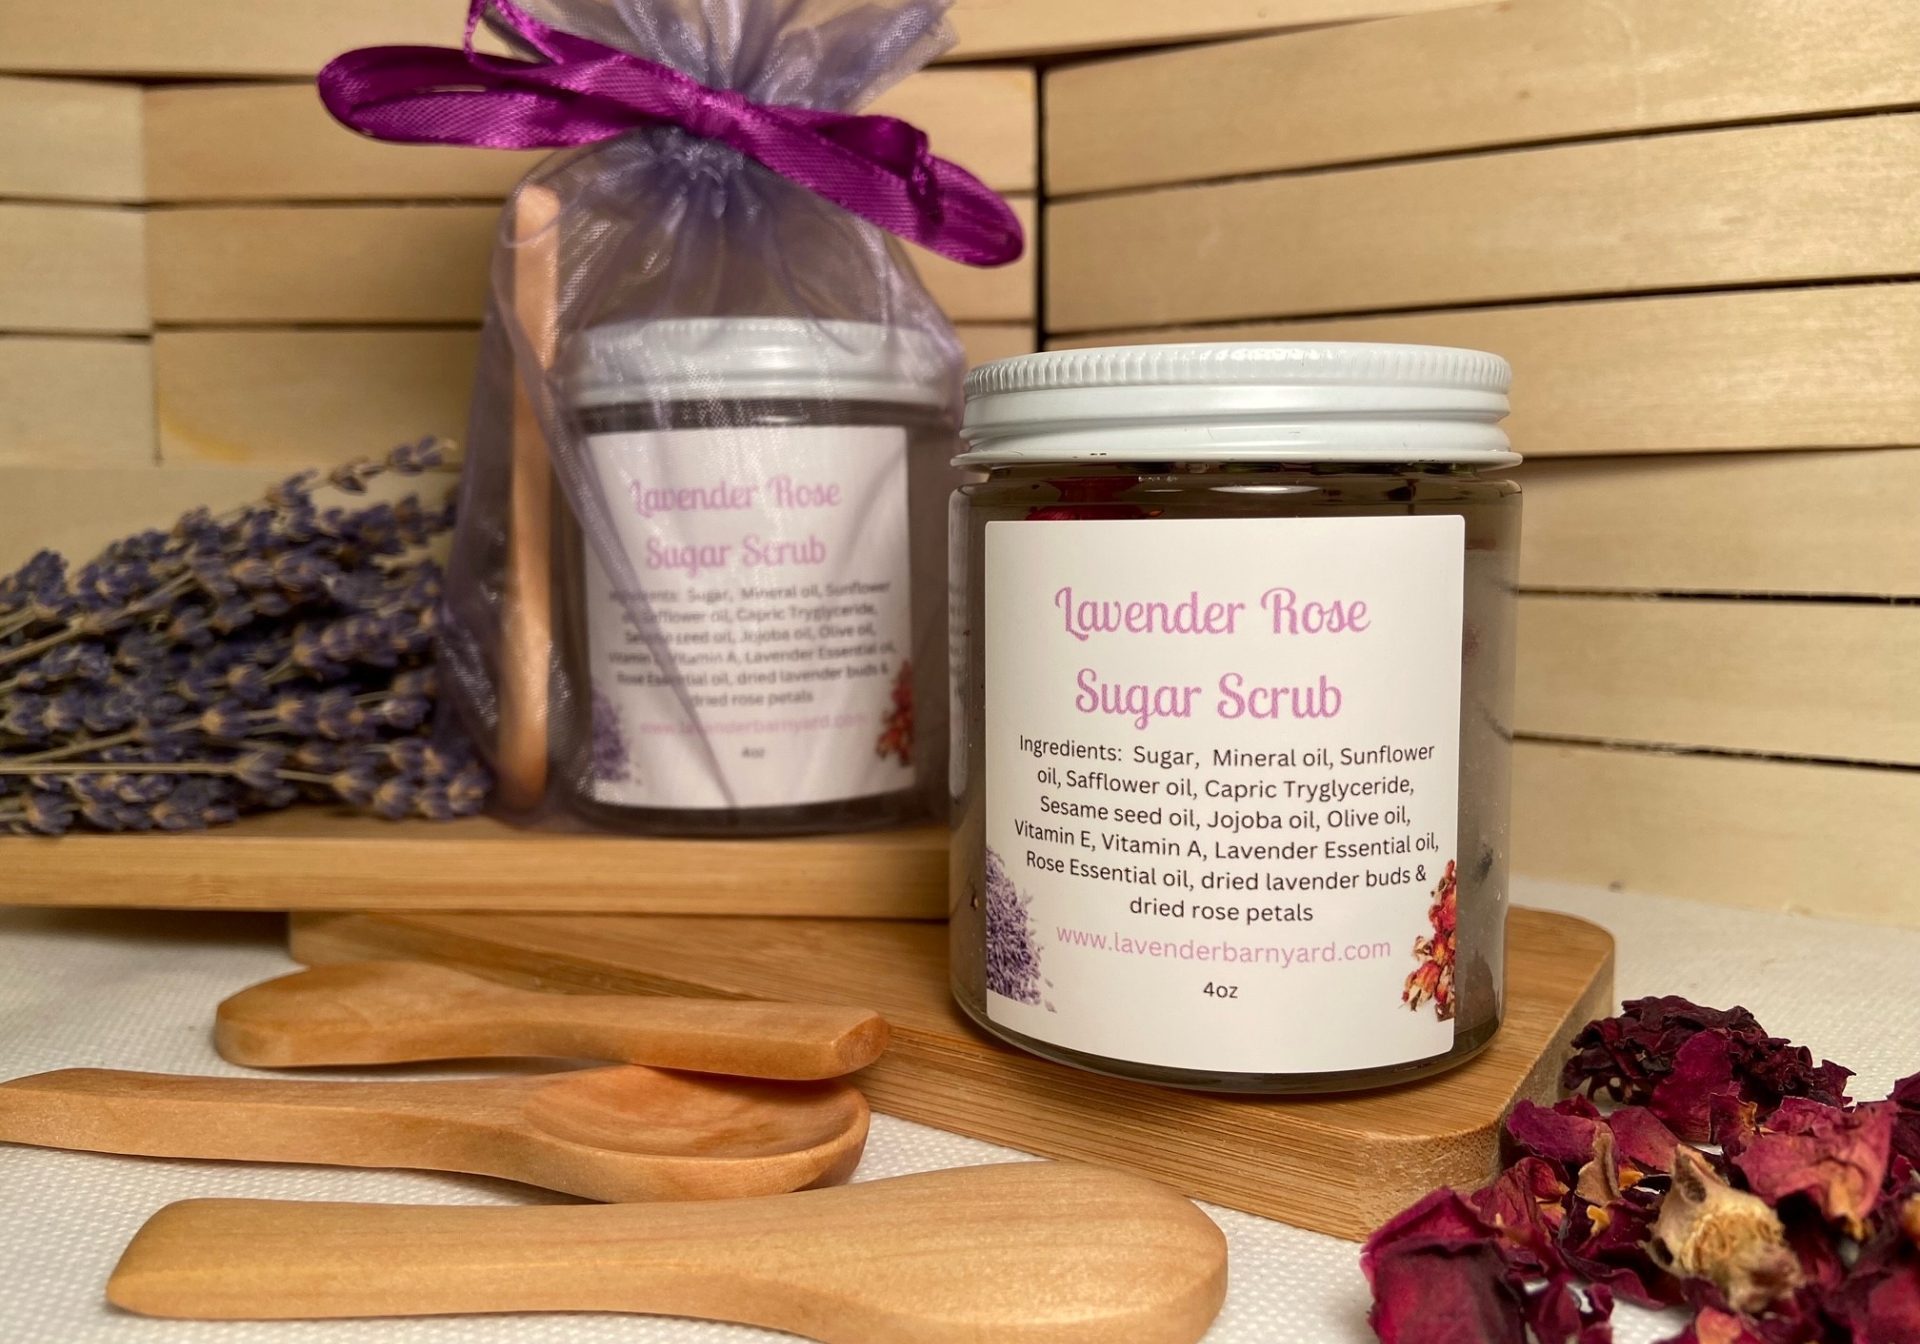 Two small jars or scented scrub pictured with dried lavender and rose petals and small wooden spoons.